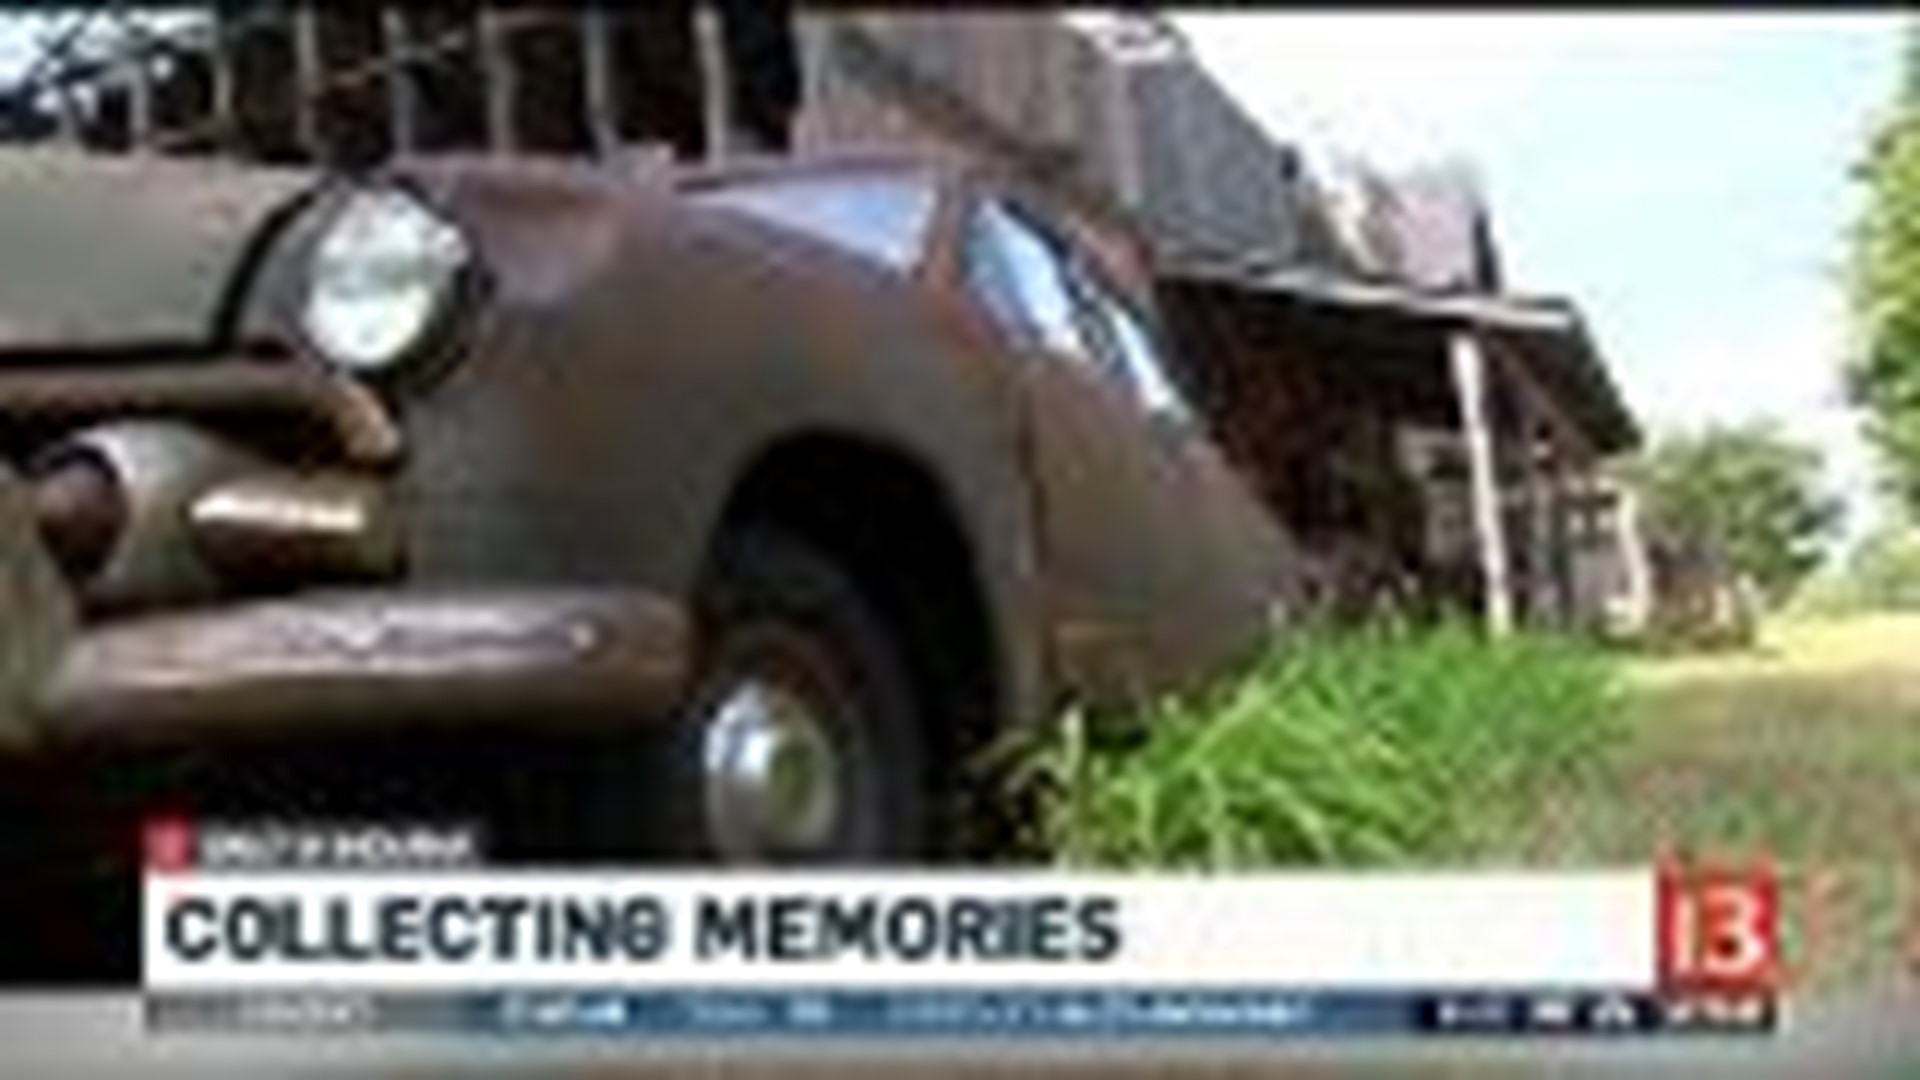 Only in Indiana: Collecting memories